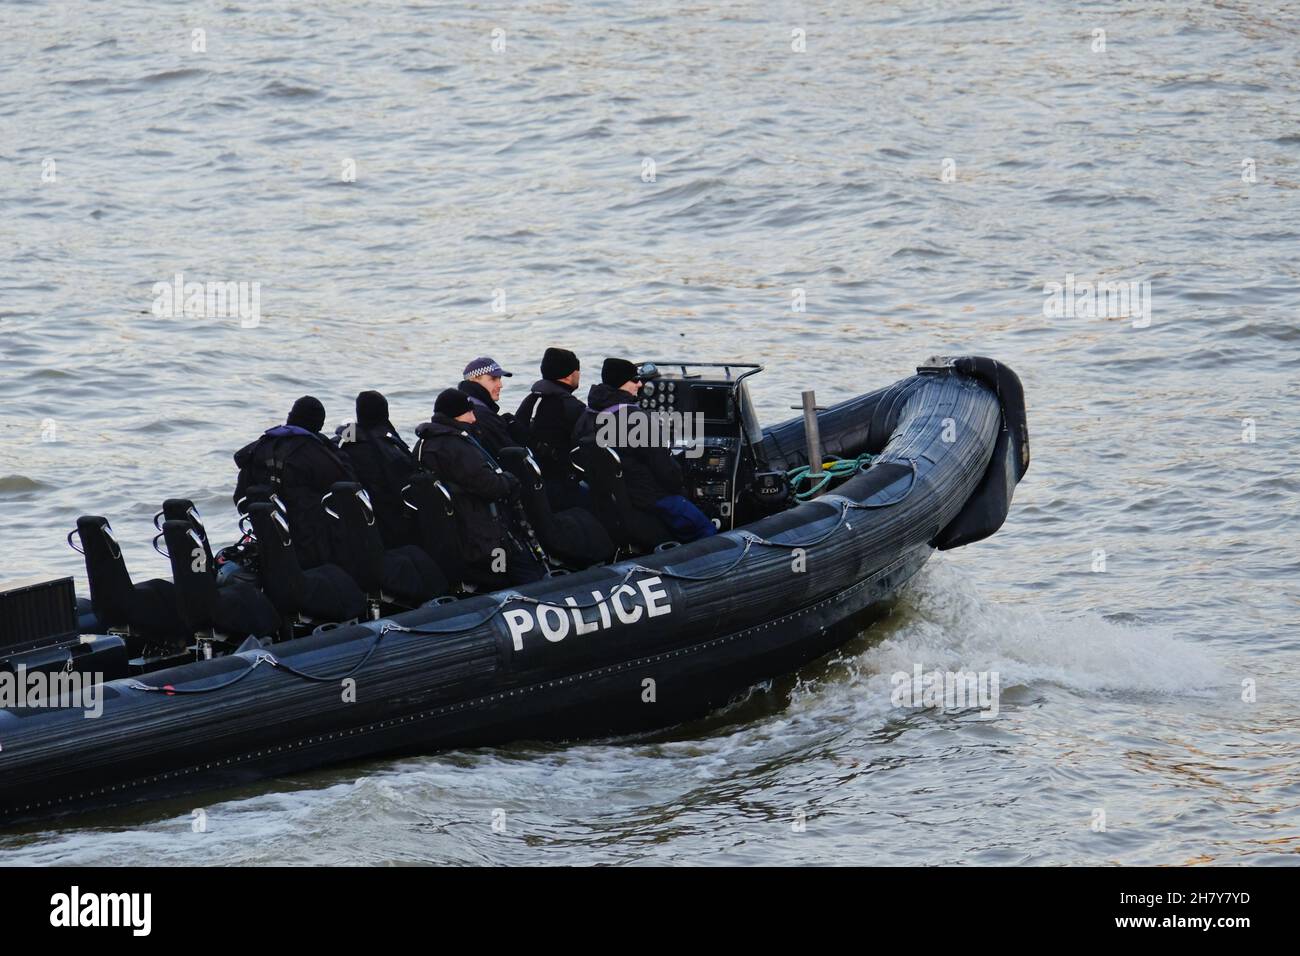 London, UK. A police boat patrols the River Thames as UK terrorism threat level is raised from substantial to severe after Liverpool taxi explosion. Stock Photo